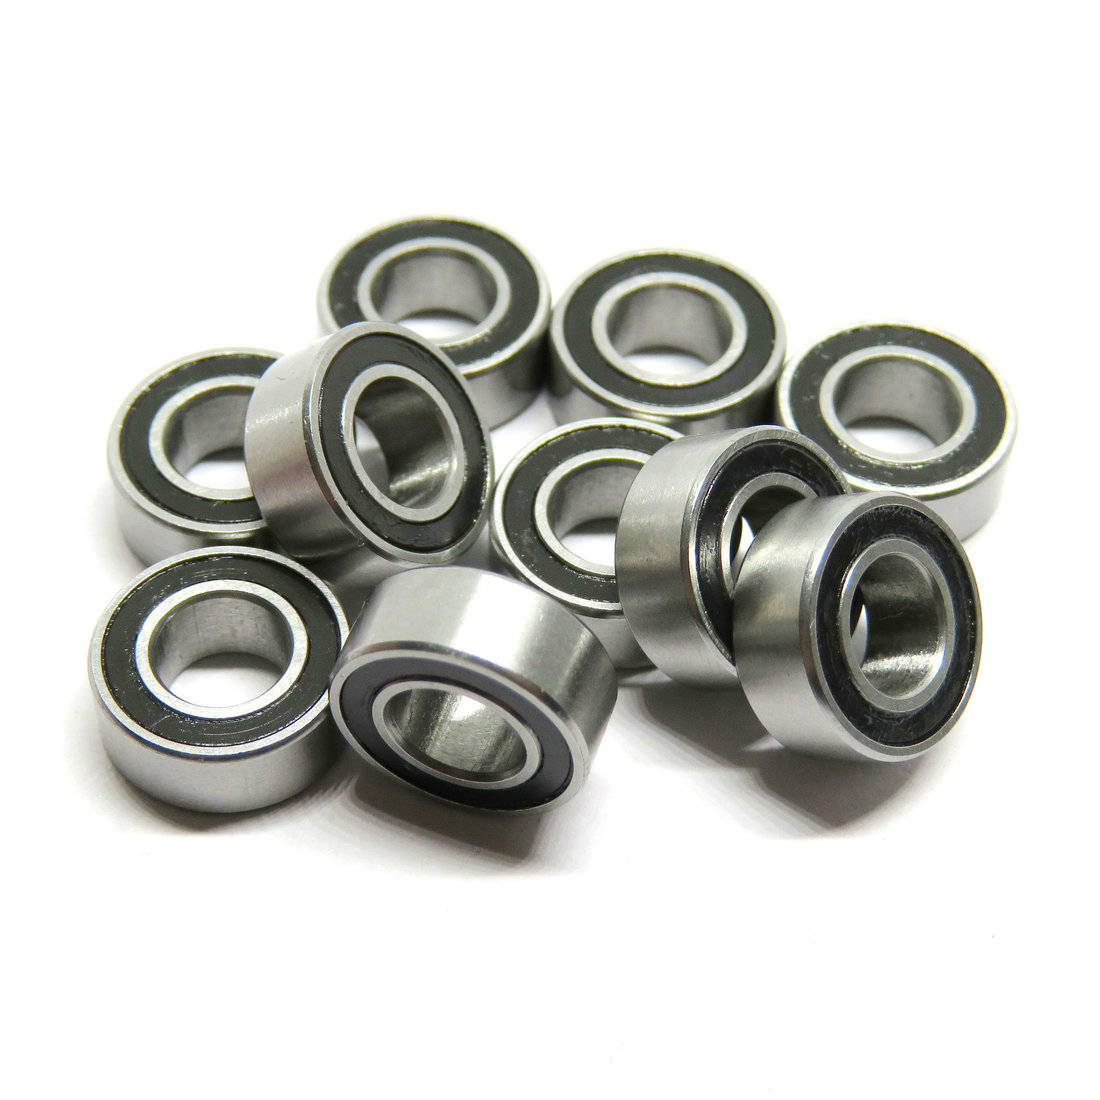 Abec-3 MR105-2RS 5x10x4 mm Rubber Seals Miniature Ball Bearing MR105RS For Rc Motor.jpg